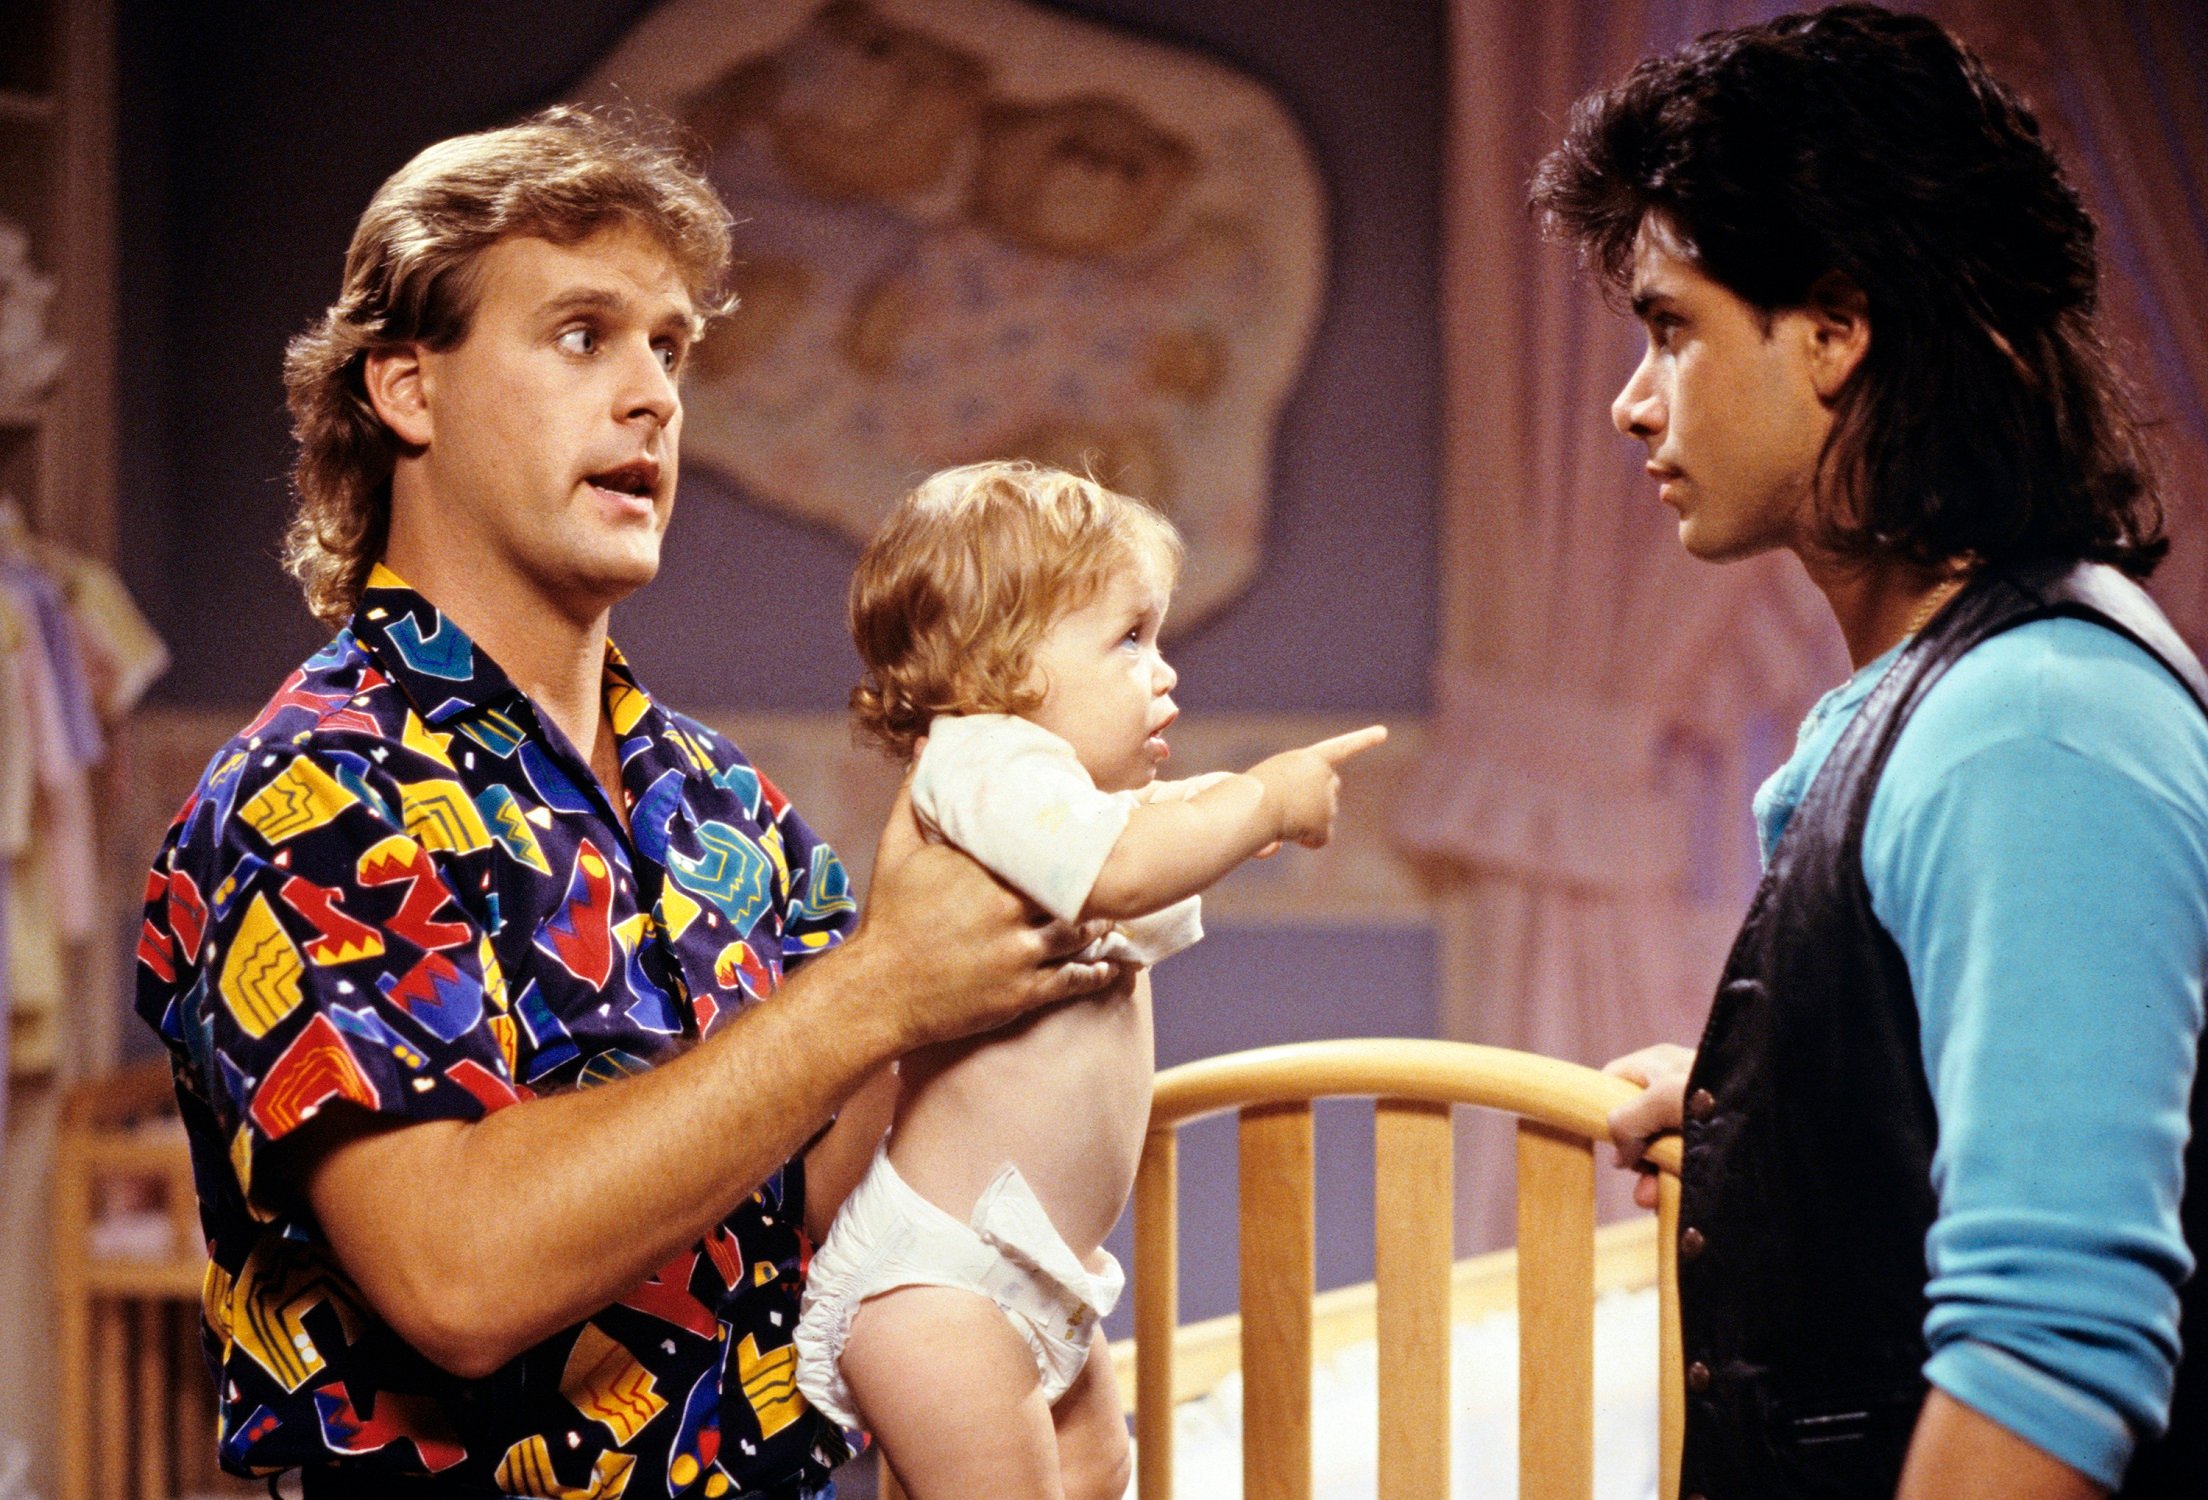 Dave Coulier as Joey Gladsotone, Mary Kate Olsen as Michelle Tanner and John Stamos as Jesse Katsopolis in 'Full House'